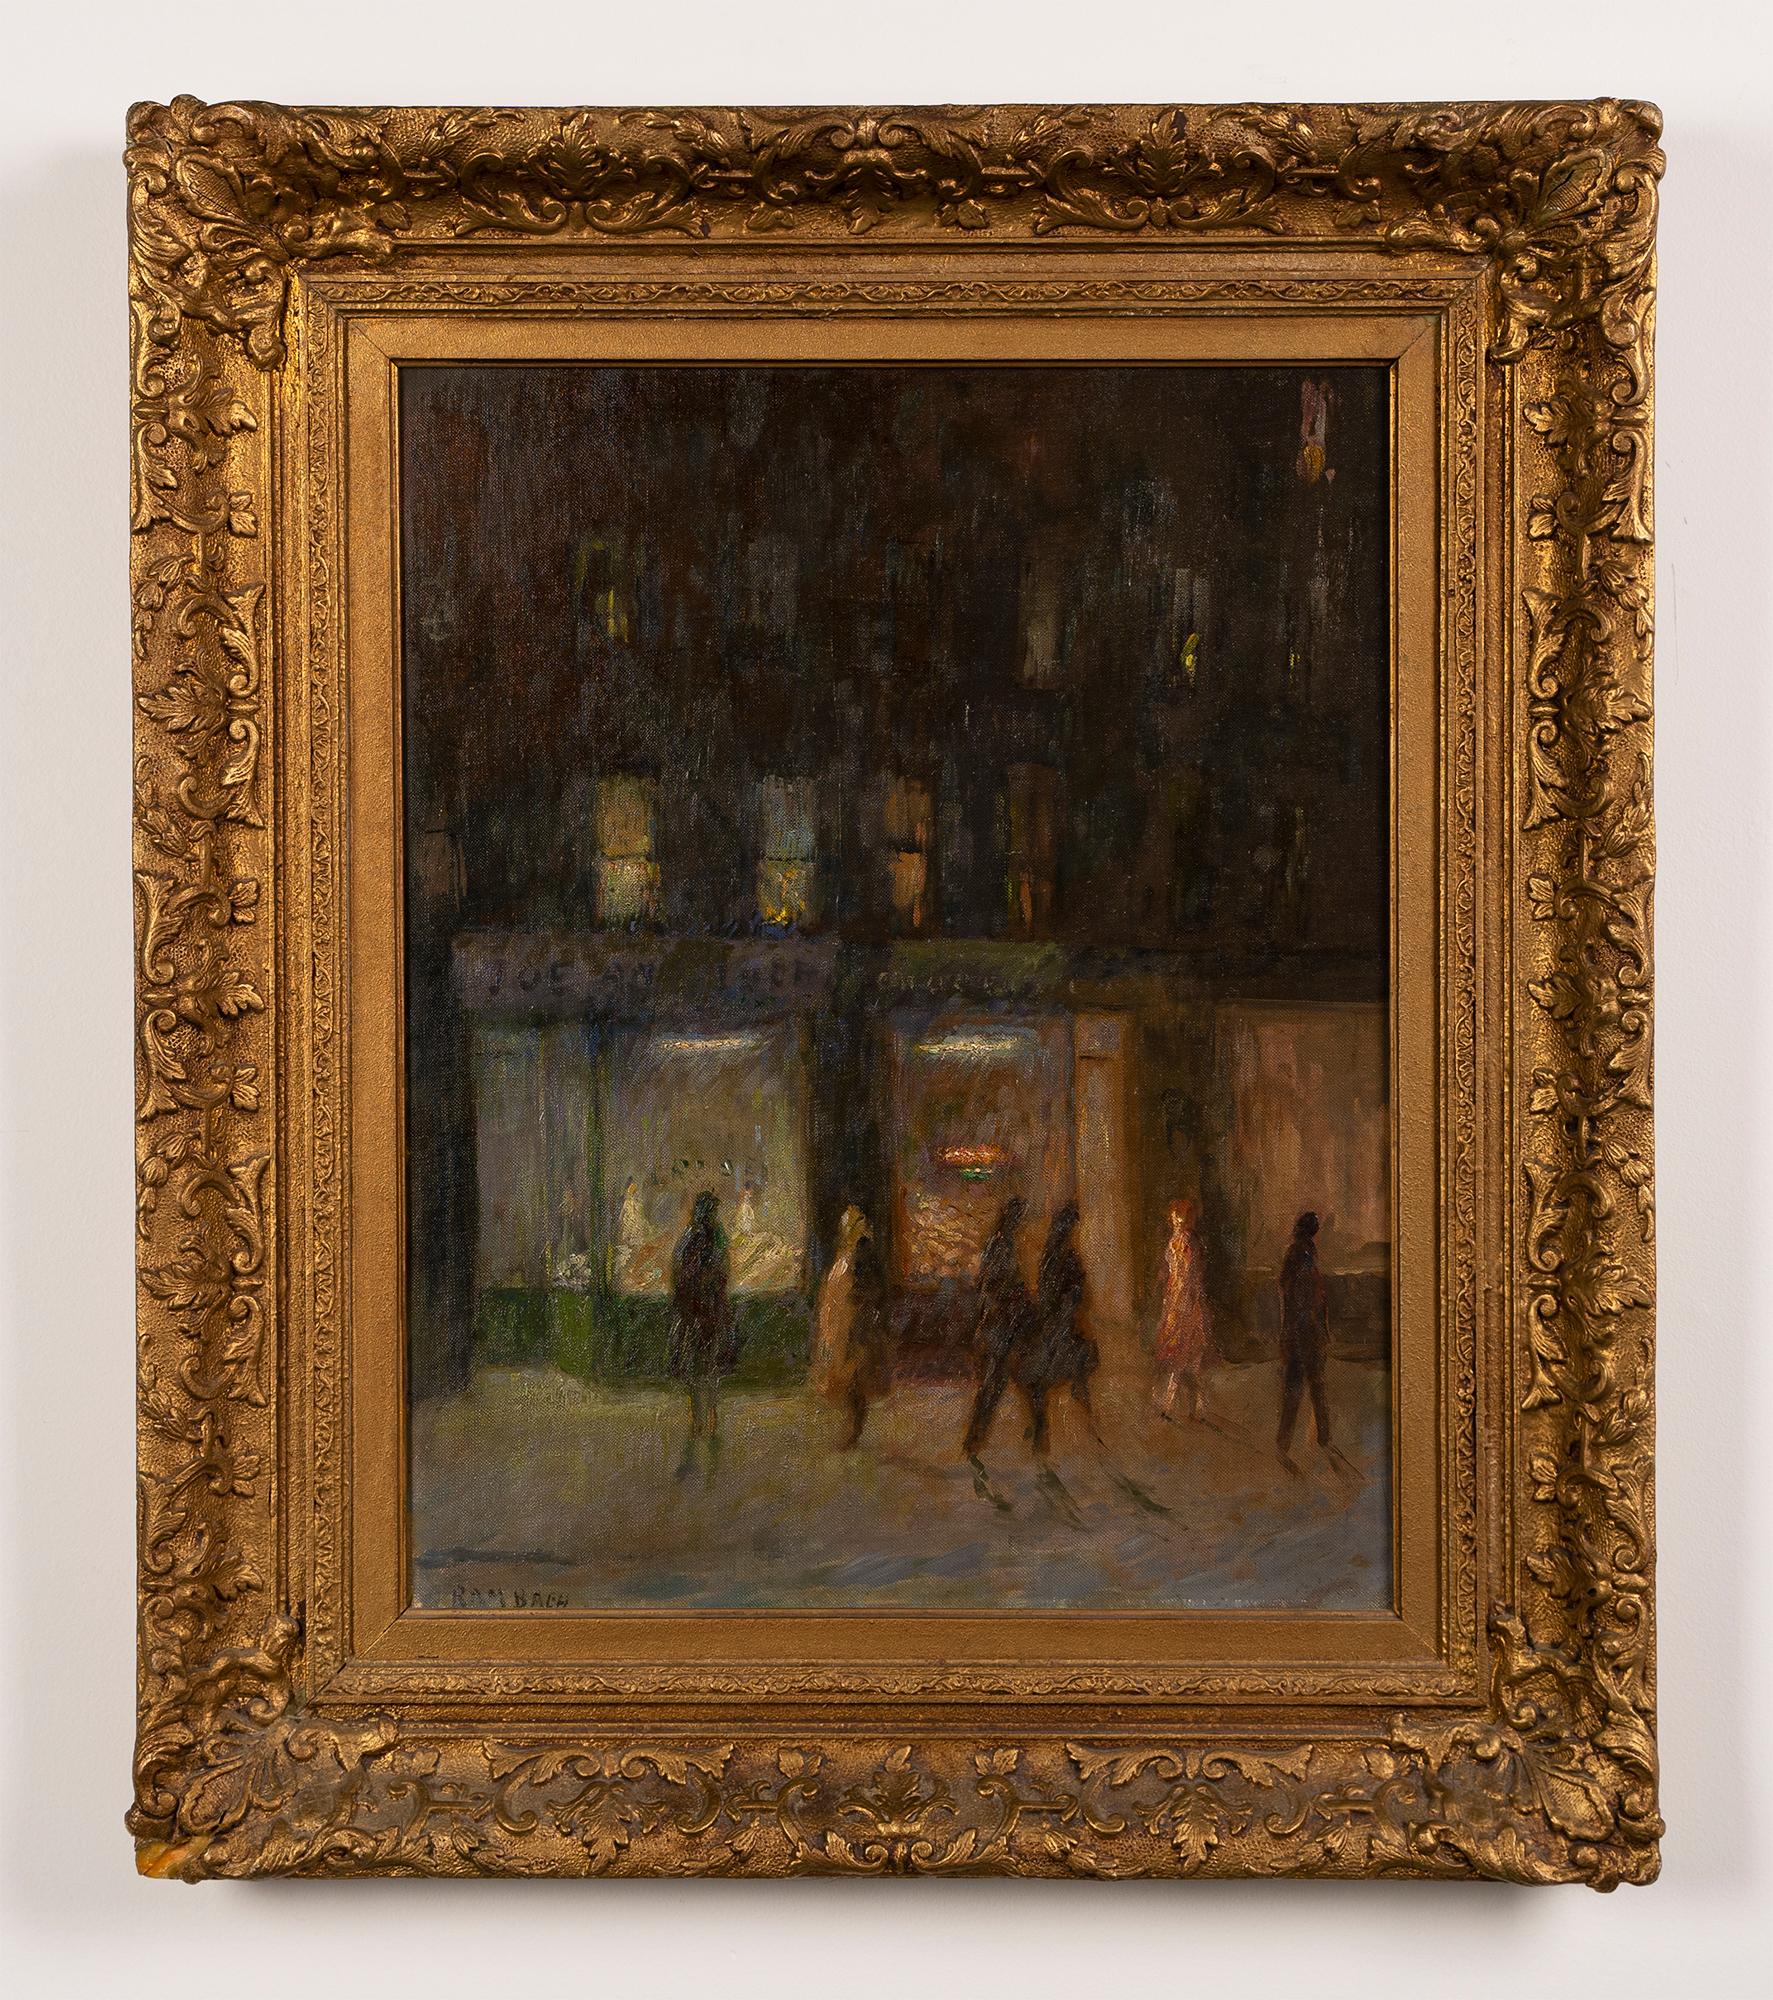 Antique original nocturnal cityscape oil painting.  Oil on board, circa 1920.  Signed illegibly.  Image size, 16.5L x 20.5H.  Housed in a period giltwood frame.
